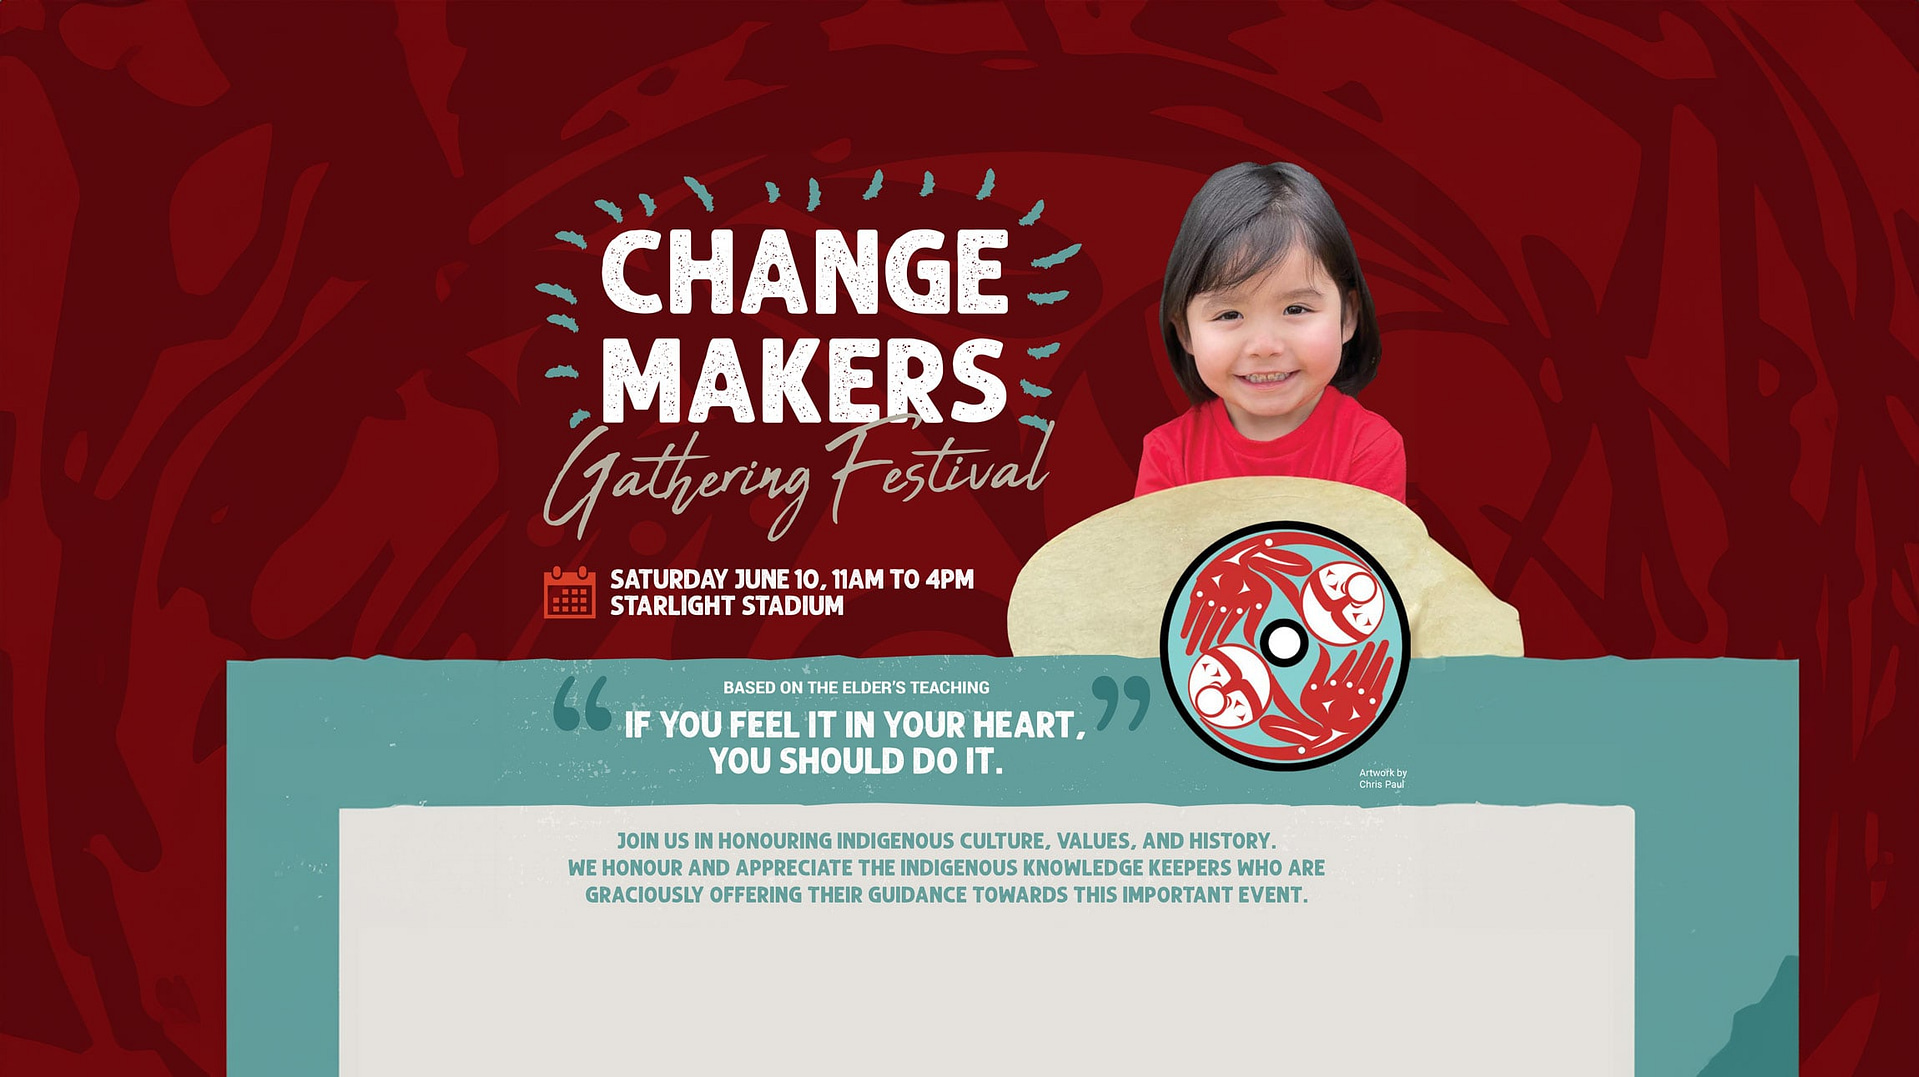 Annual ChangeMakers Gathering Festival